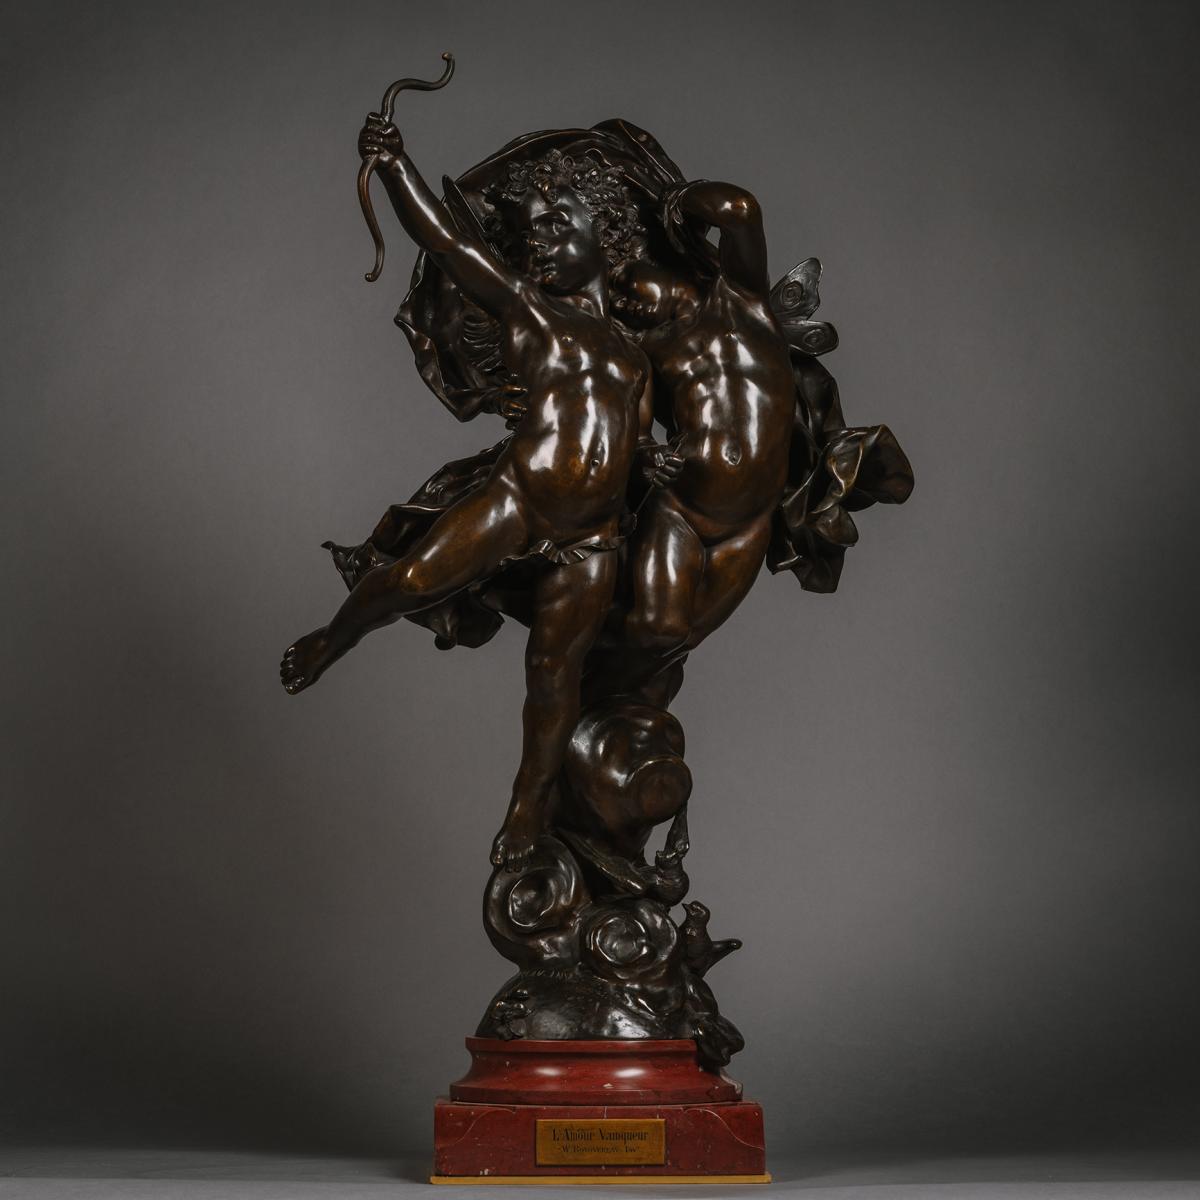 A Fine Patinated Bronze Figural Group of Cupid and Psyche, Entitled 'L'Amour Vainqueur' ('A Love Vanquished') By Adolphe Itasse (French, 1830 - 1893)